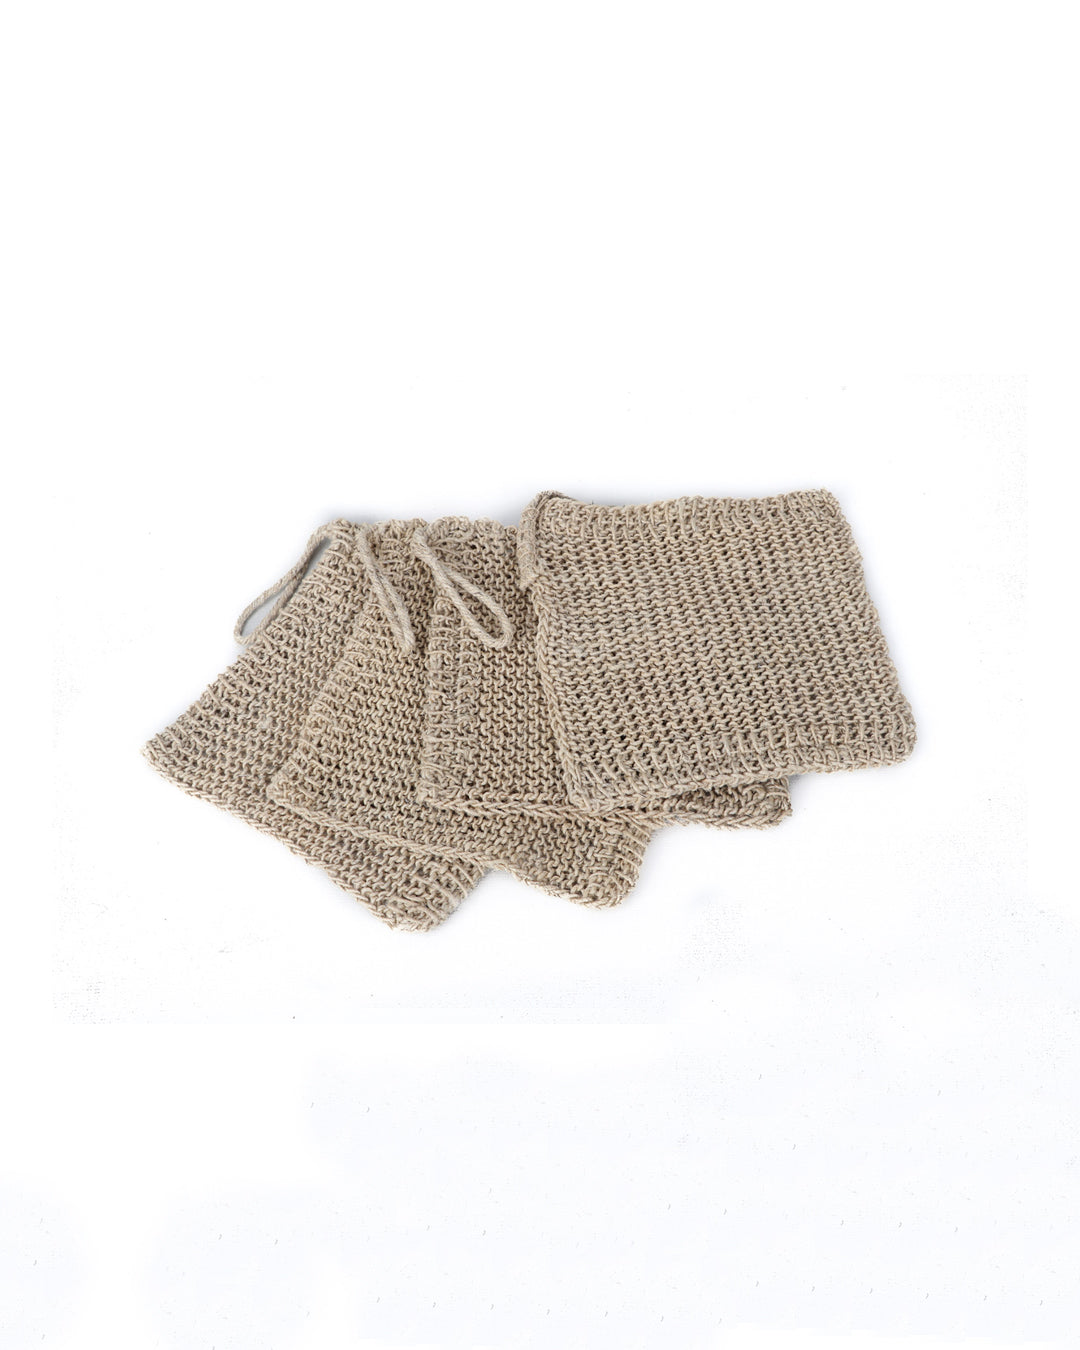 Hemp Knitted Wash Cloths, Small - Pack of 4